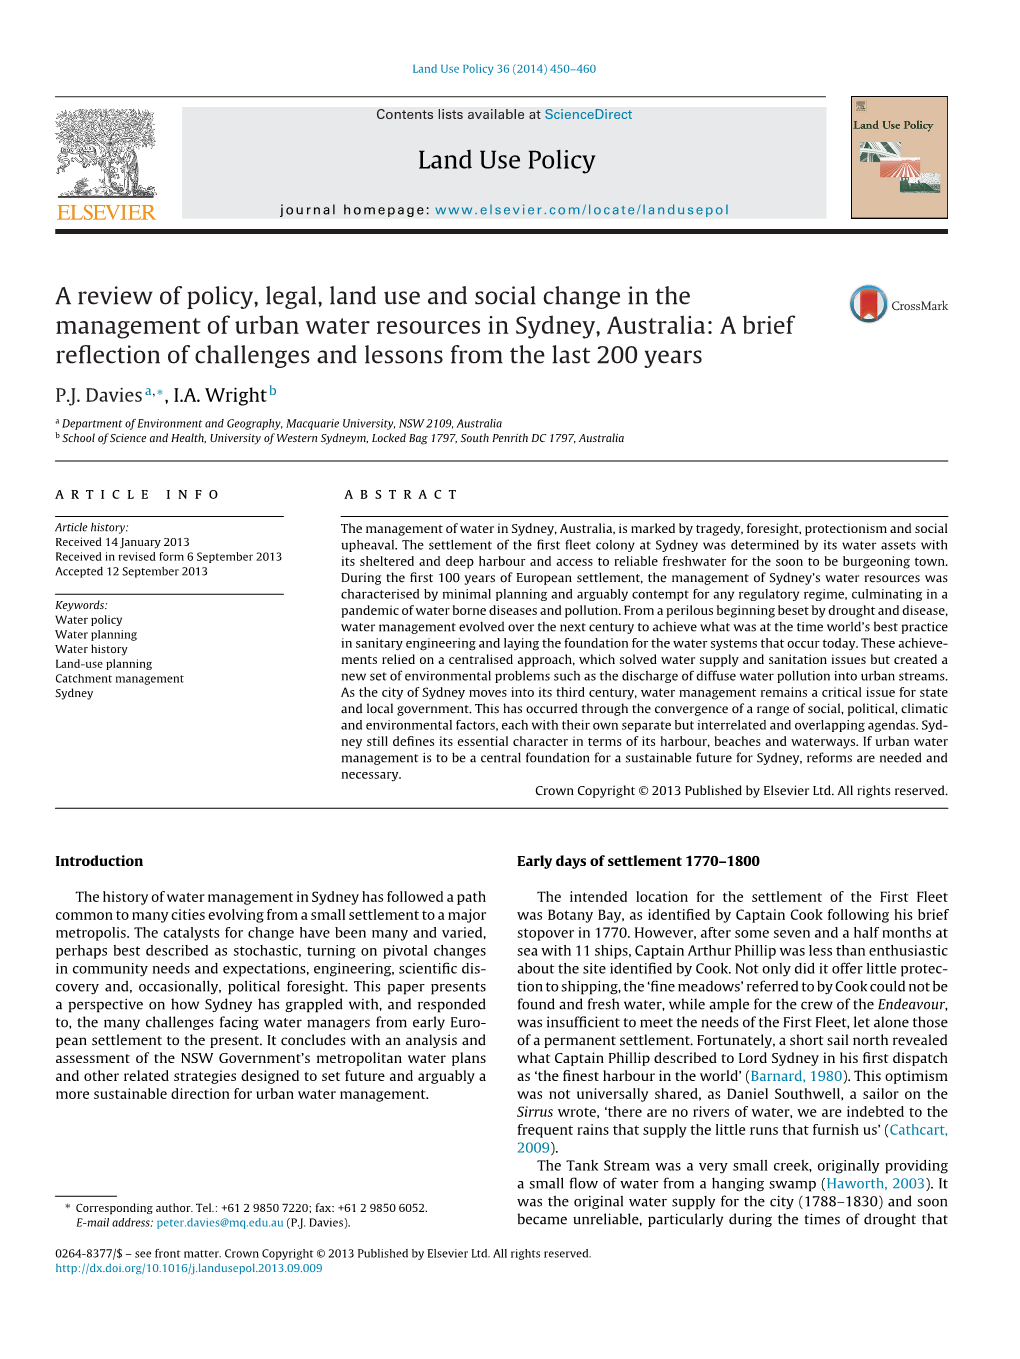 A Review of Policy, Legal, Land Use and Social Change in the Management